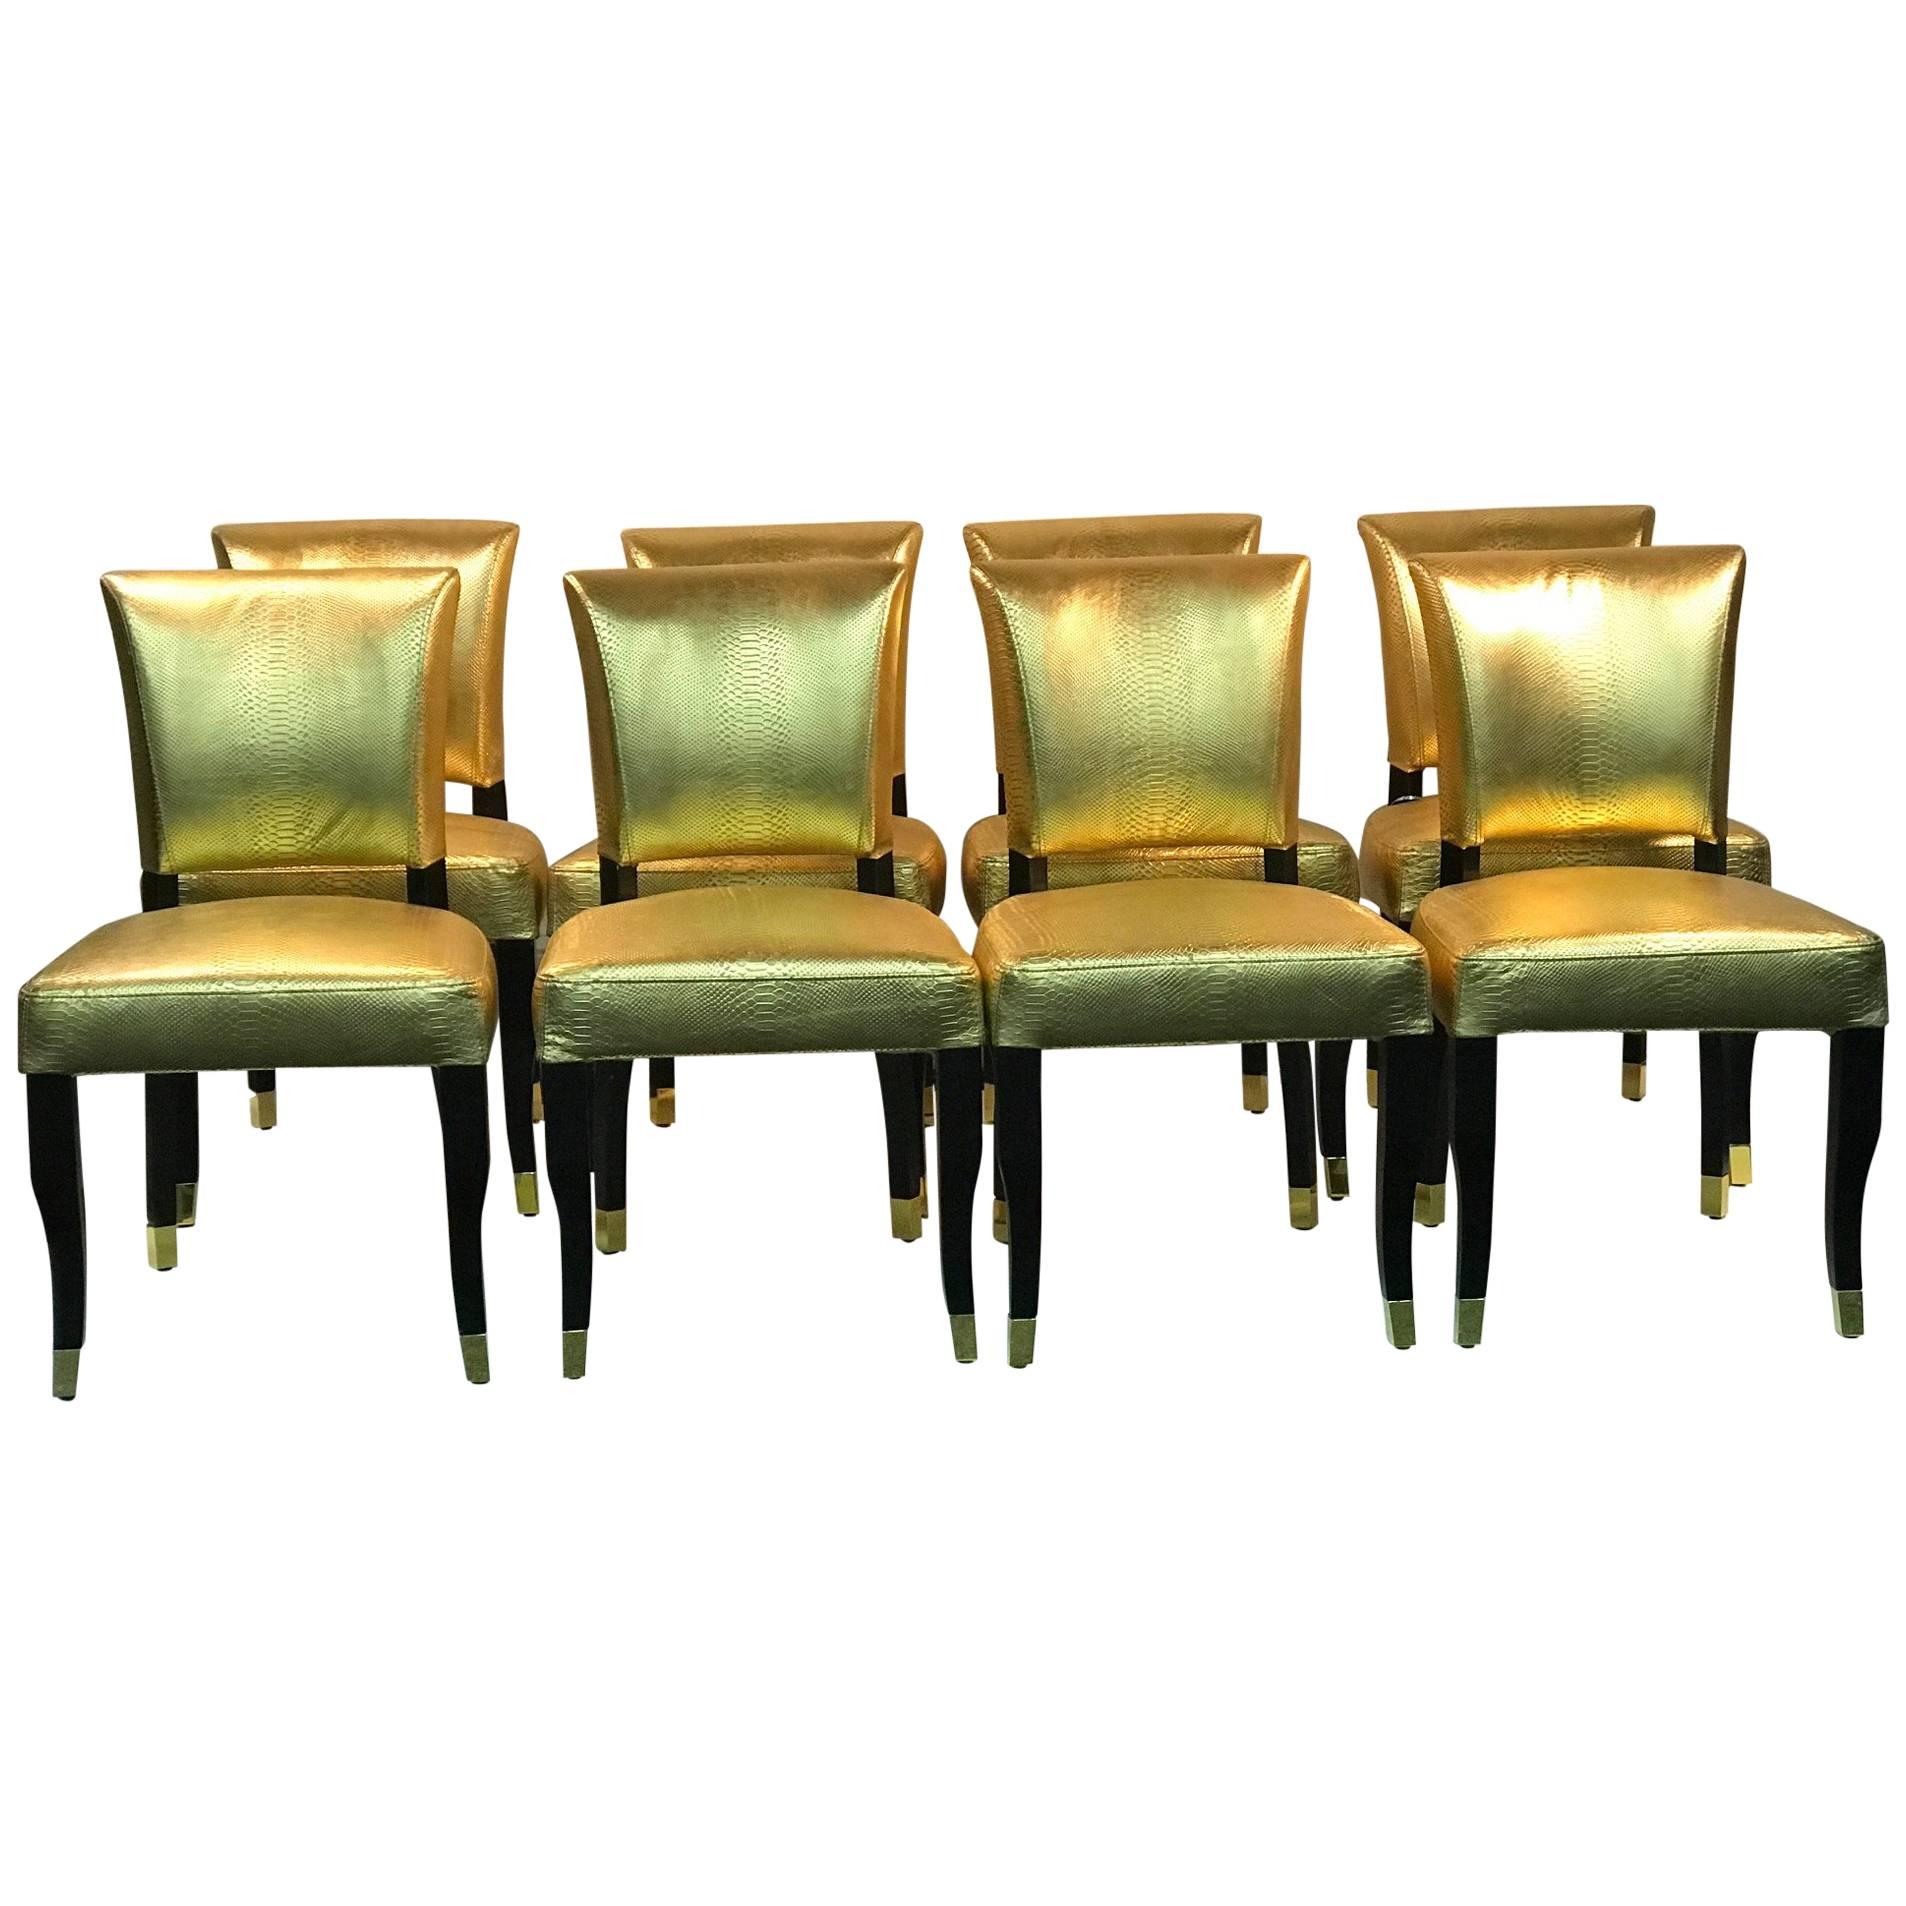 Suite of Eight Gold Faux Snakeskin Chairs with Decorative Gold Buckle Backs For Sale